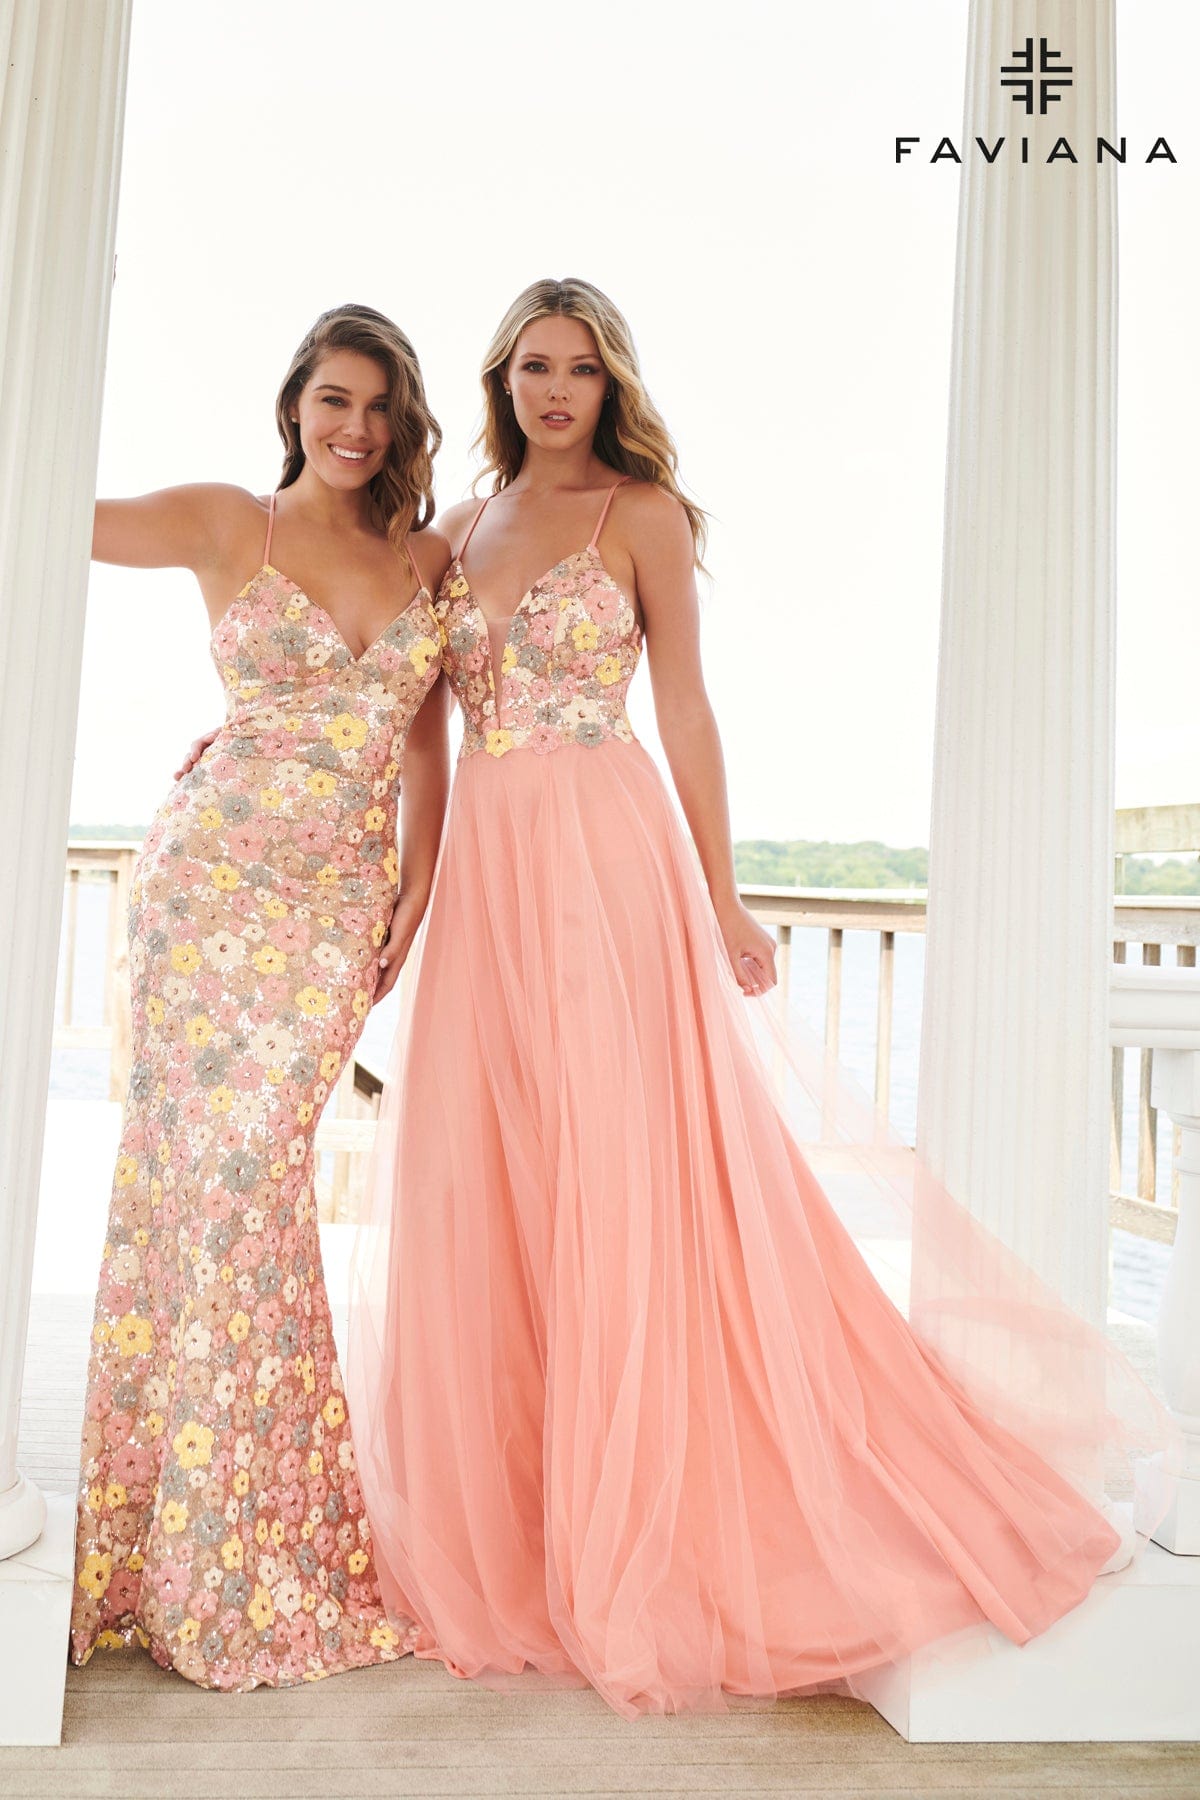 Sequin Prom Dress With Floral Aesthetic Design | 11000